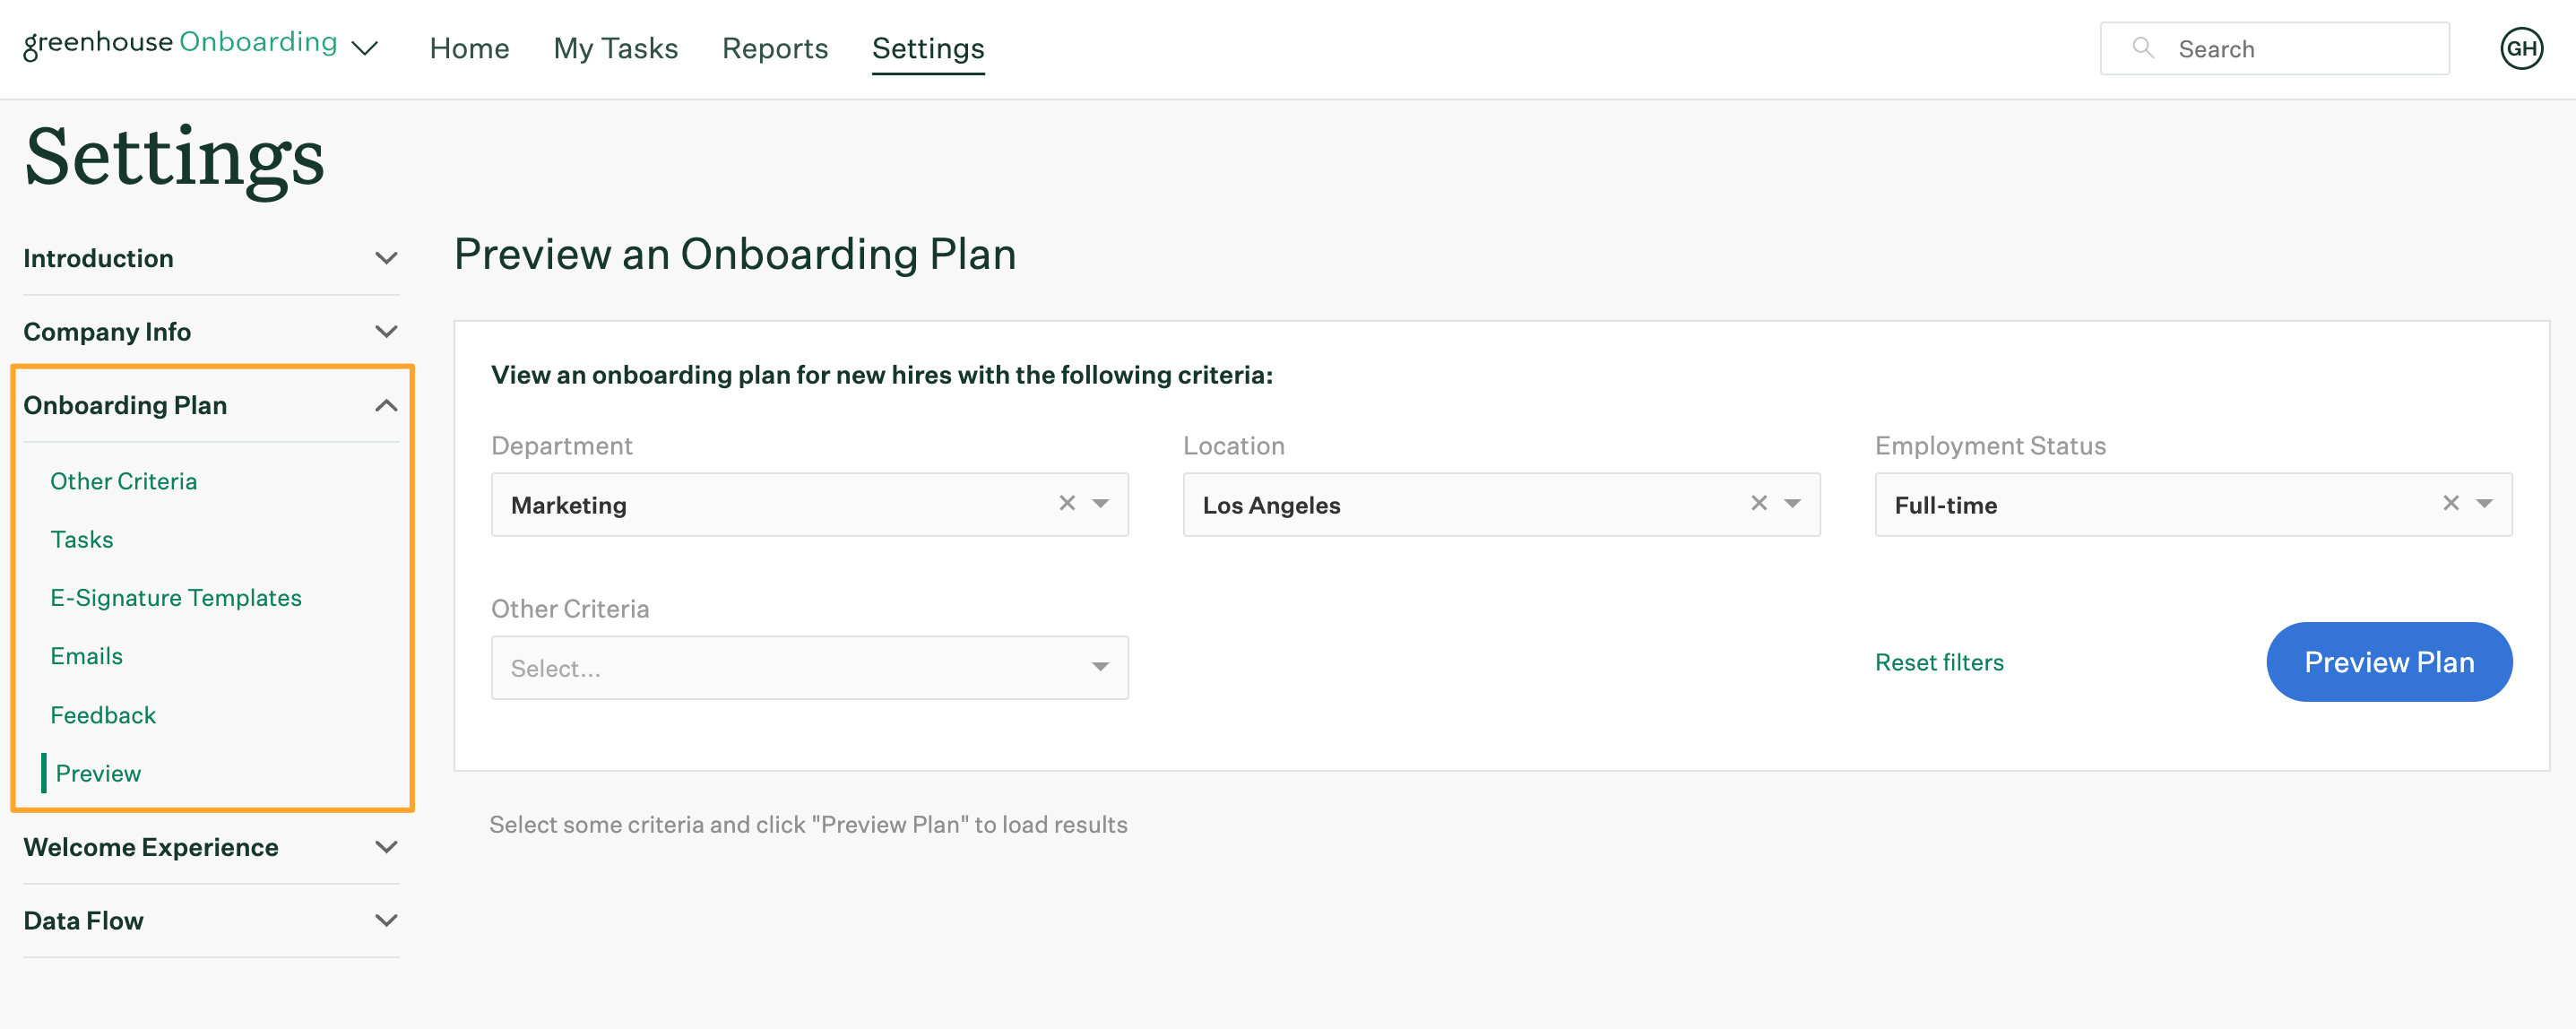 Greenhouse Onboarding Settings page with Onboarding Plan section opened and highlighted